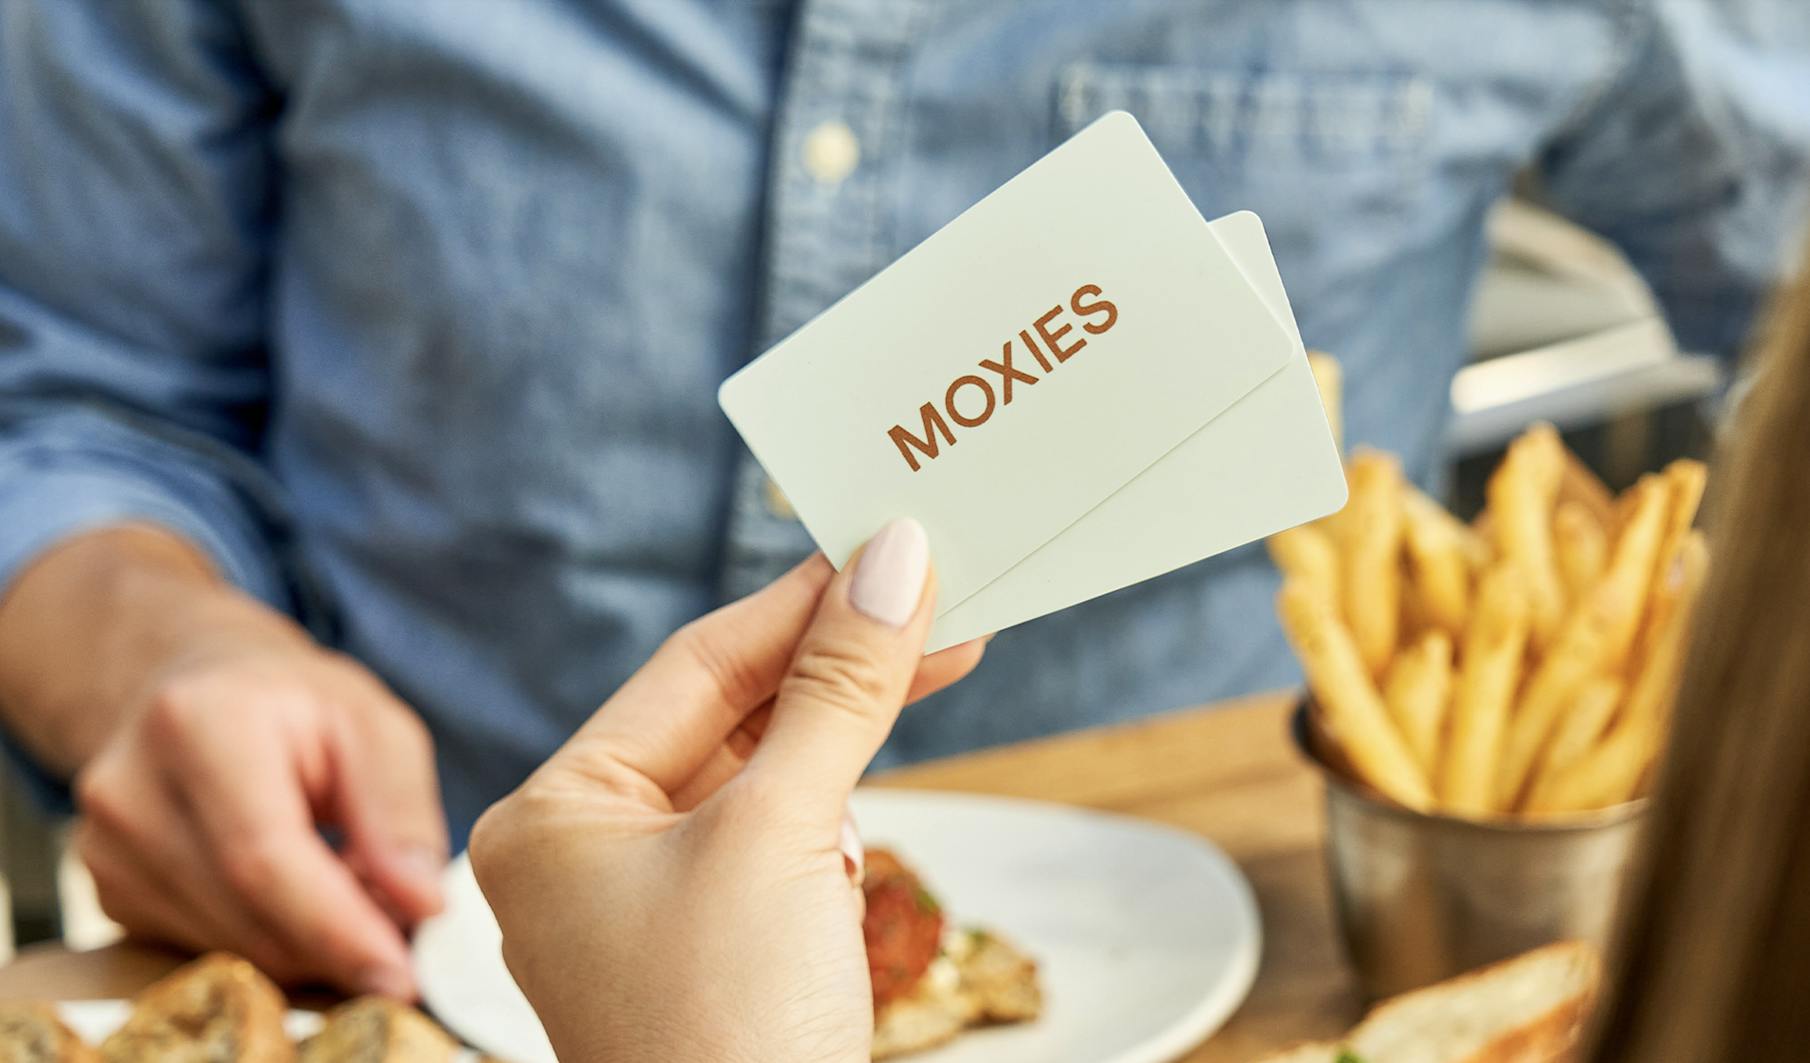 moxies restaurant corporate gift cards